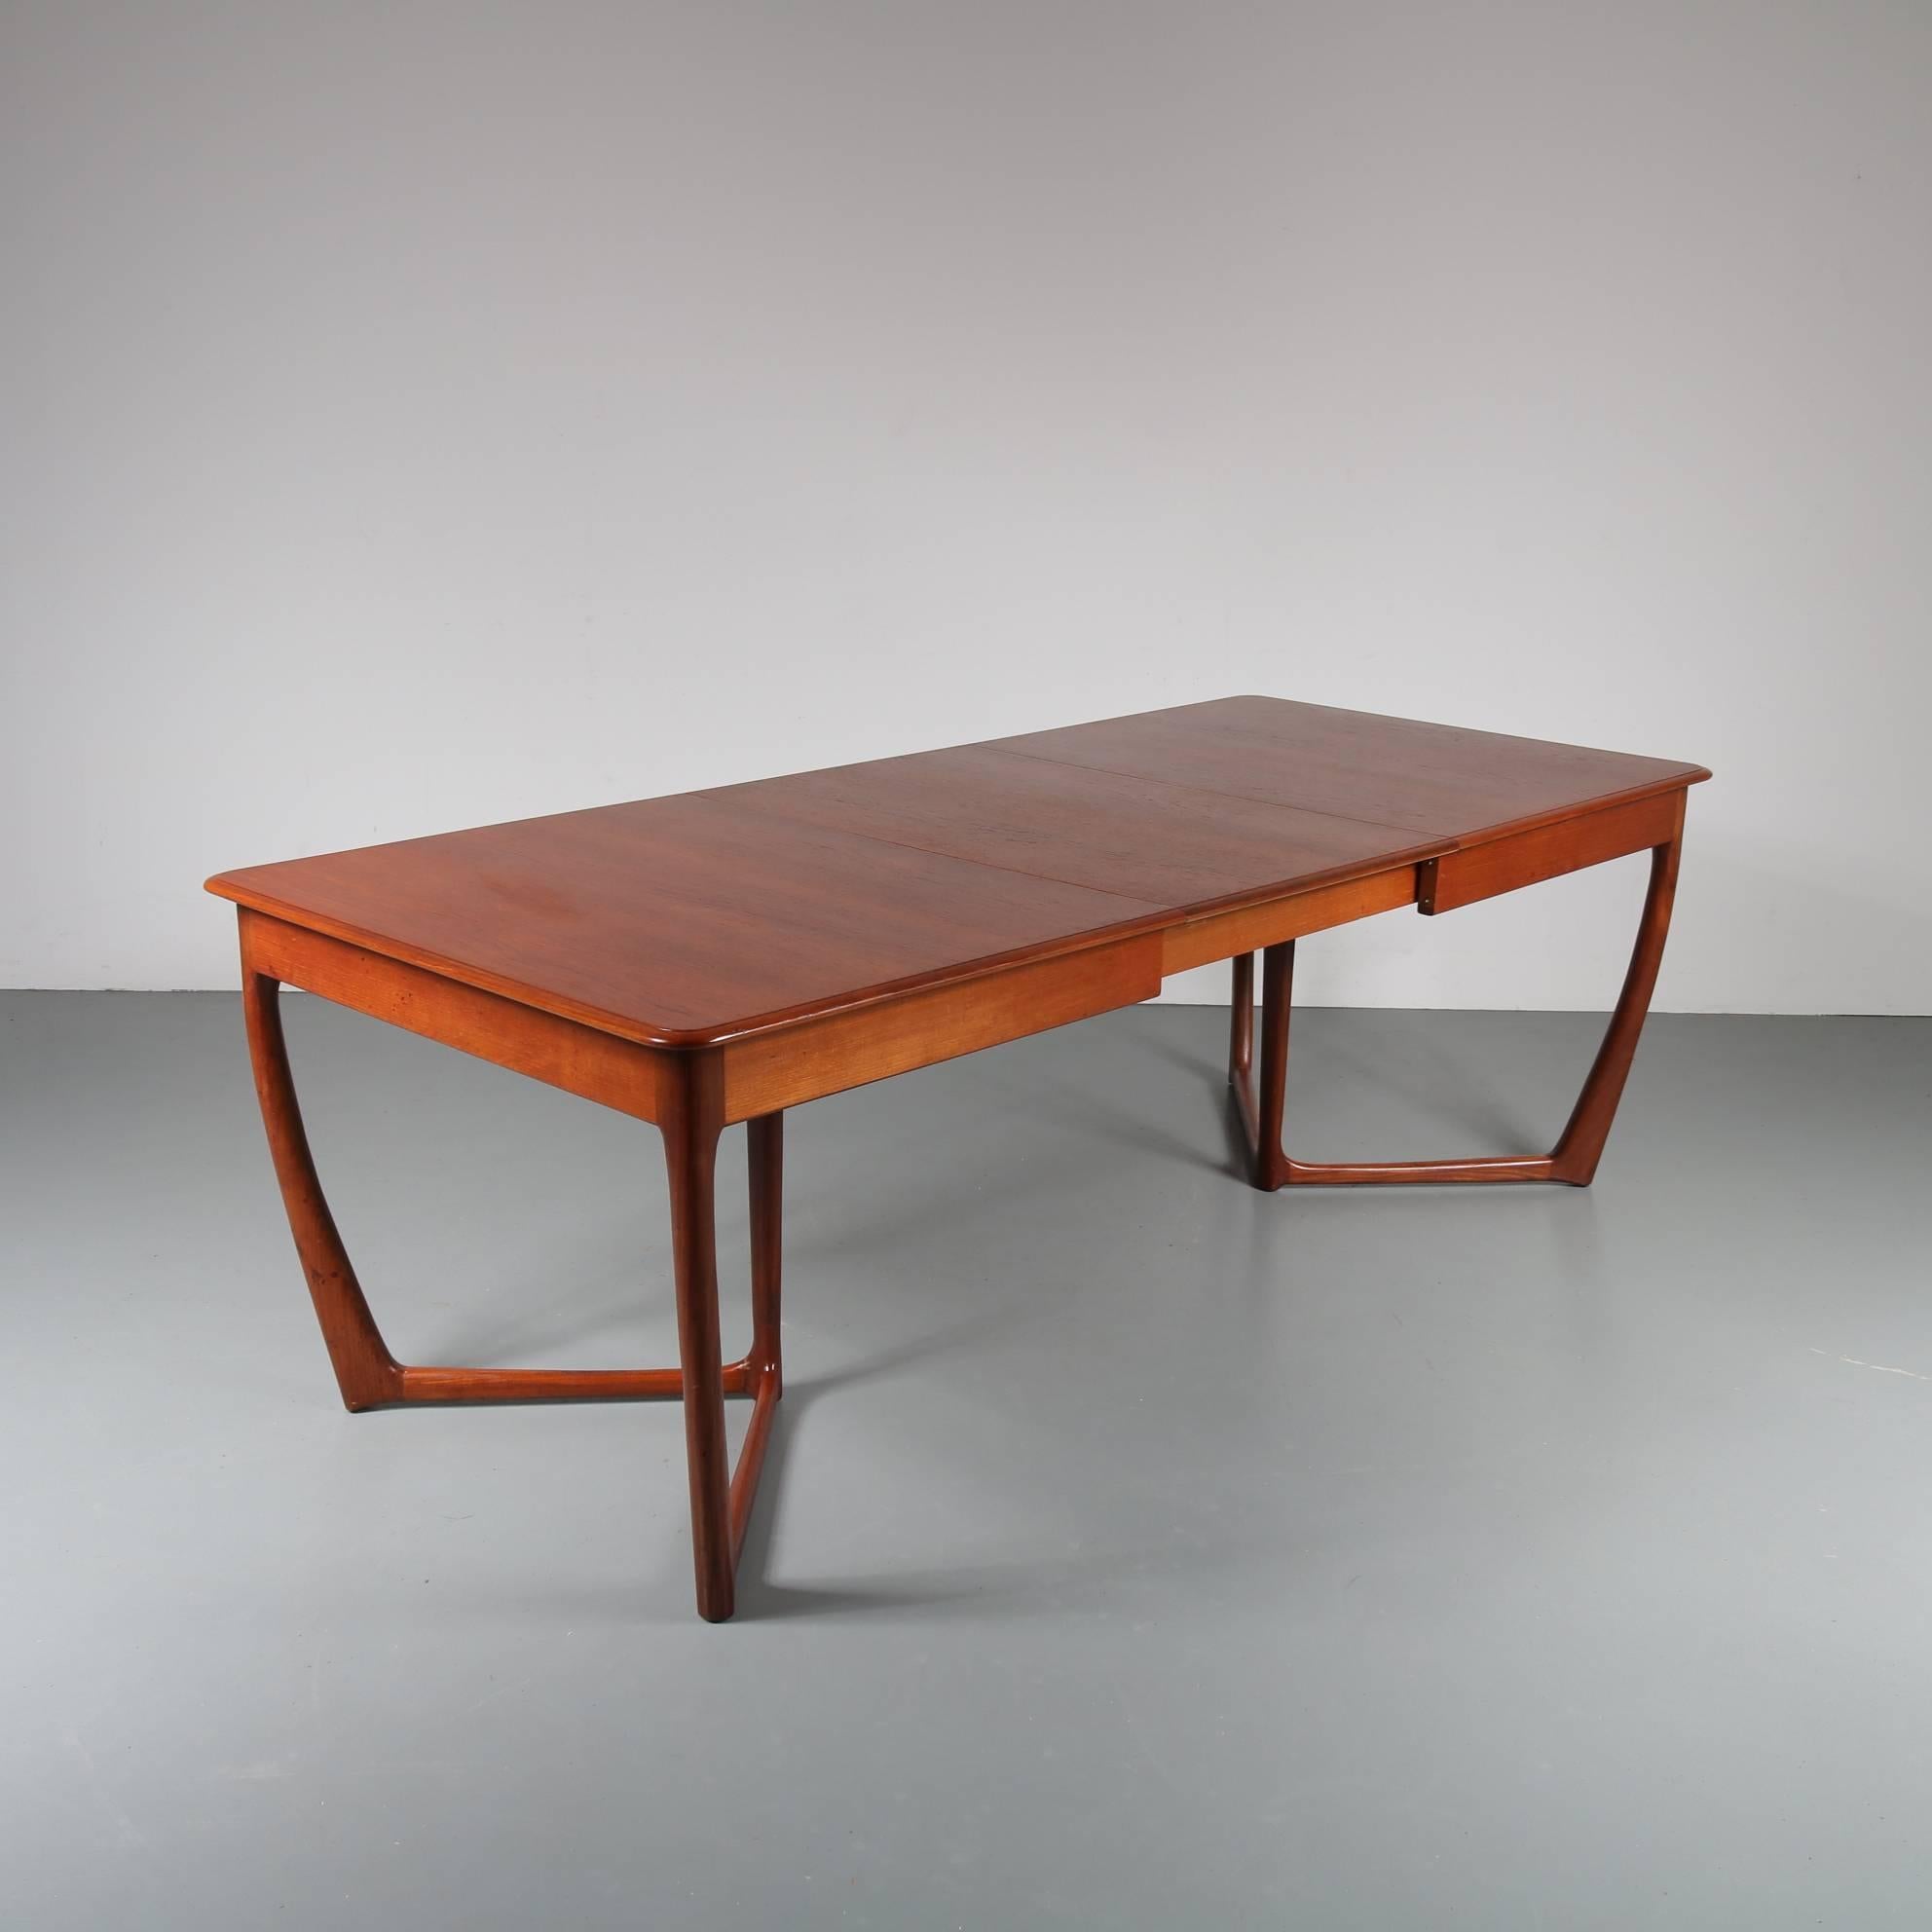 A stunning extendable dining table manufactured by Beithcraft in Scotland around 1950.

This eye-catching piece is made of the highest quality teak wood, beautifully crafted with a fine eye for detail. The legs are connected in a unique open